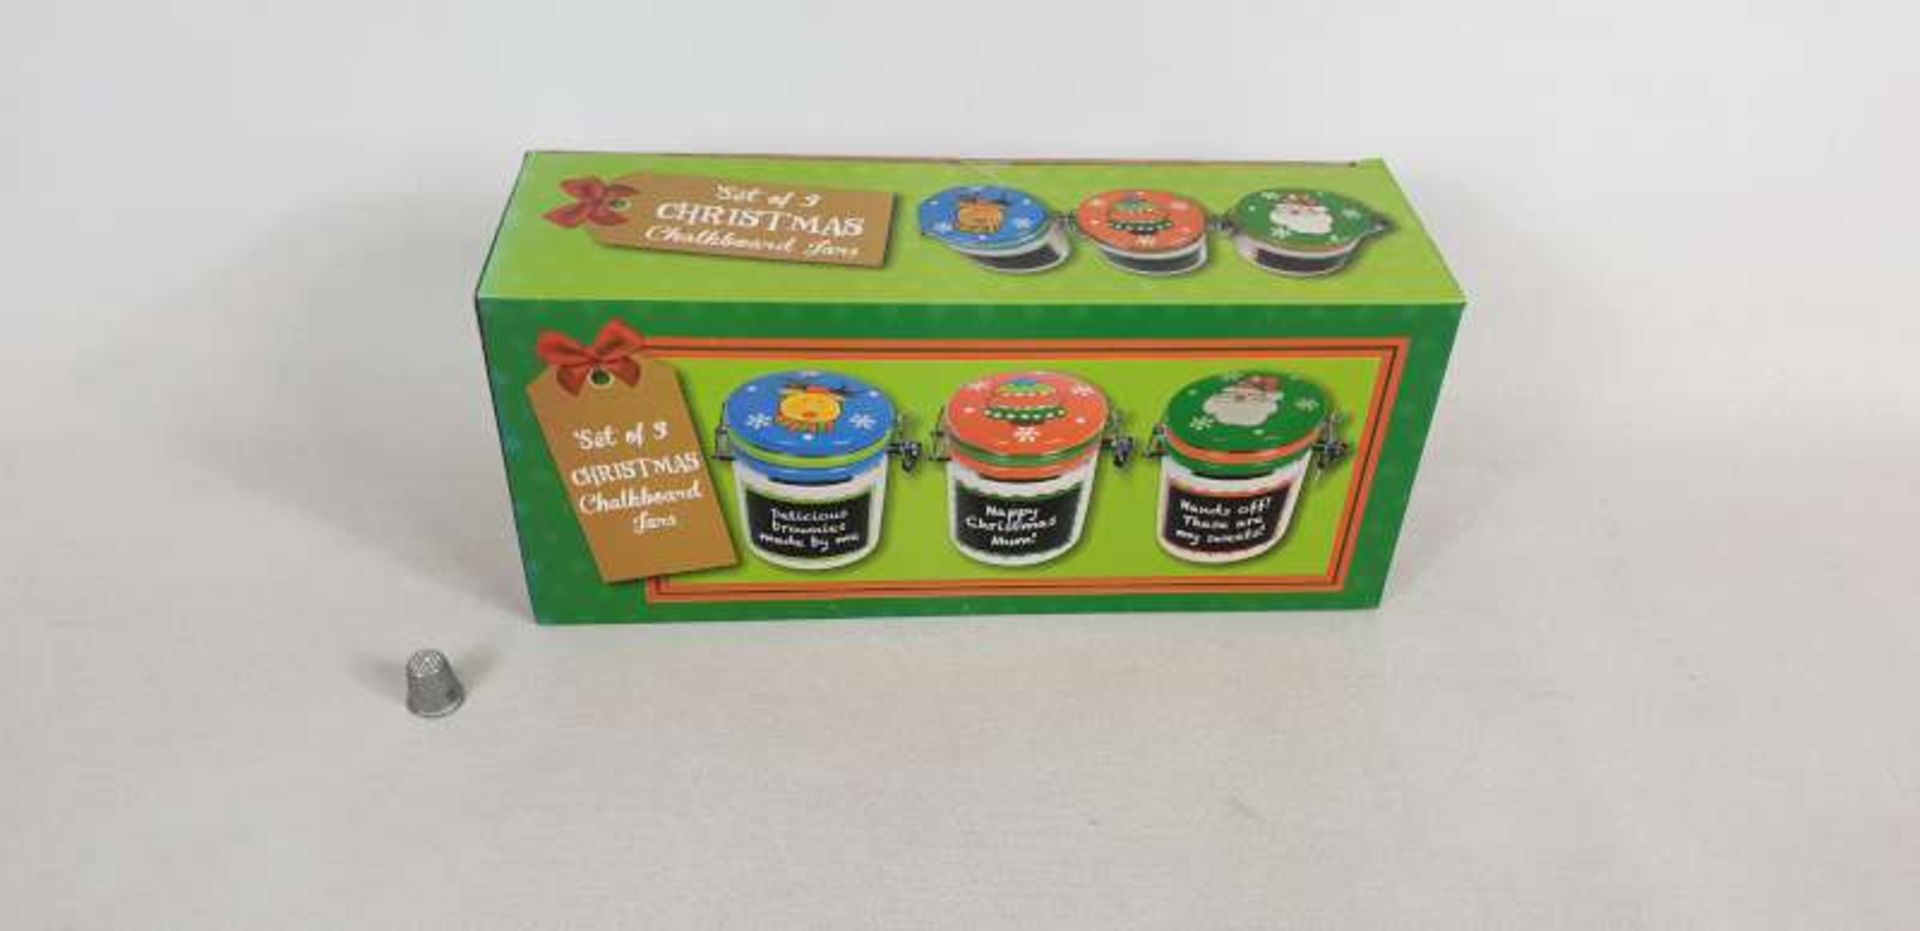 60 X SETS OF 3 CHRISTMAS CHALKBOARD JARS IN 6 BOXES